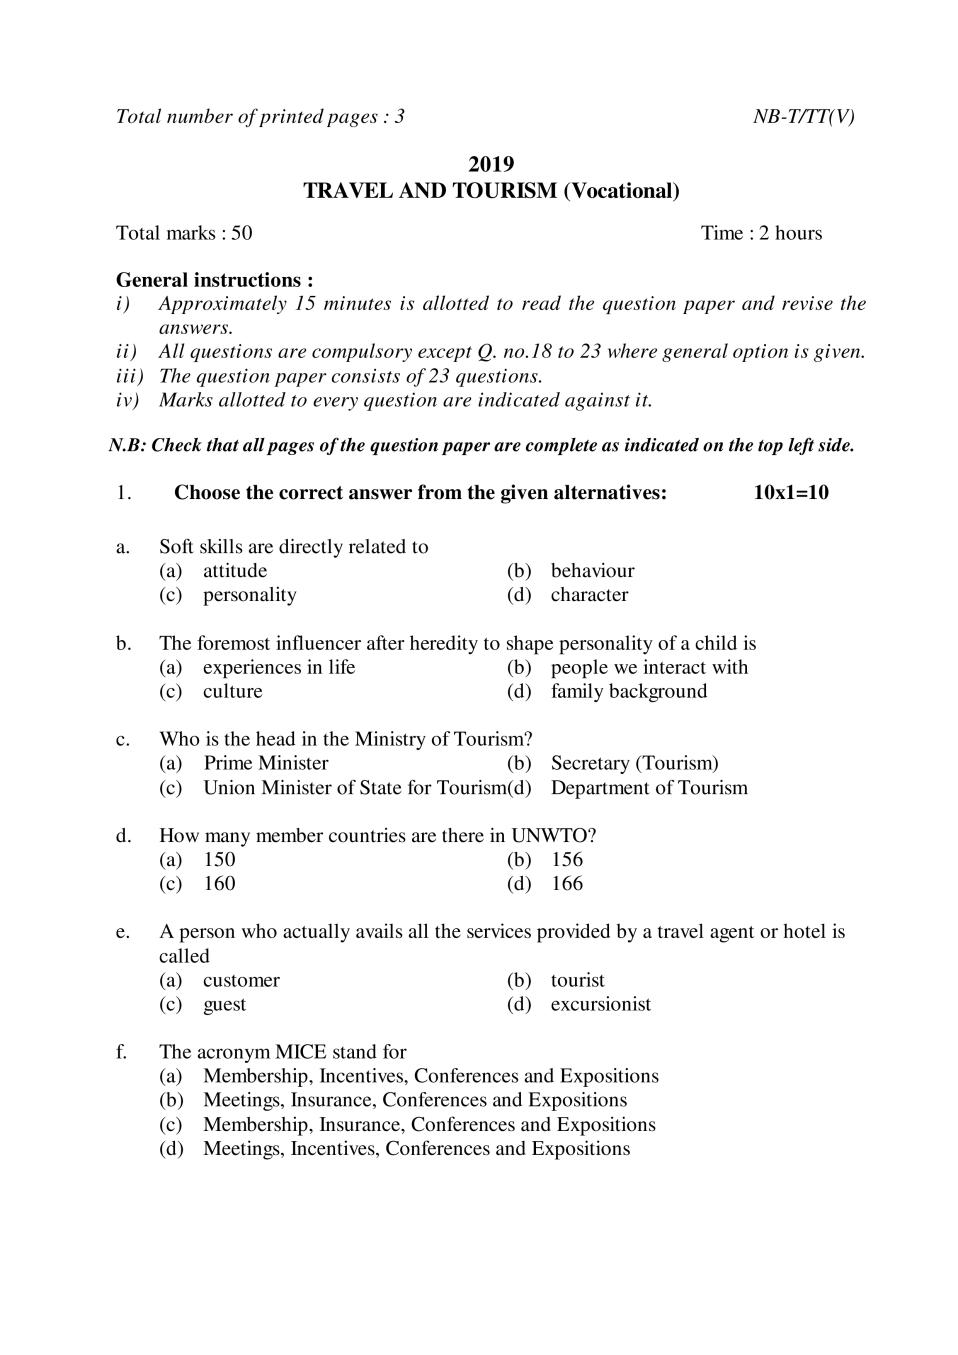 NBSE Class 10 Question Paper 2019 for Travel Tourism - Page 1